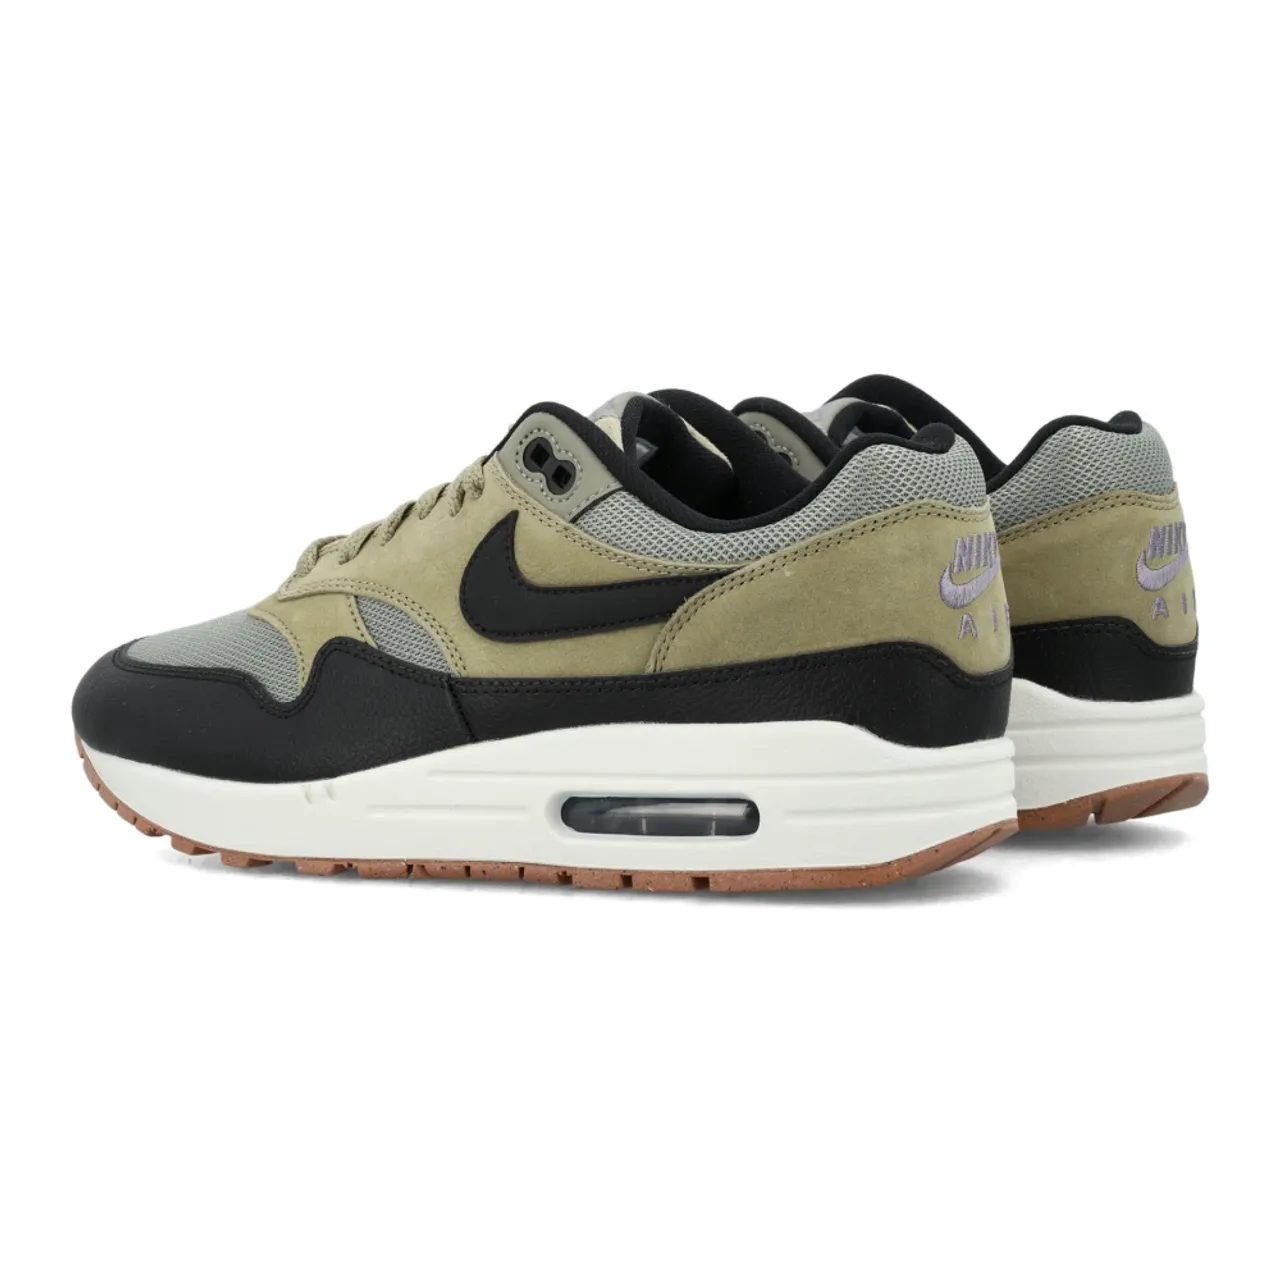 Nike , AIR MAX 1 SC Sneakers ,Multicolor male, Sizes: